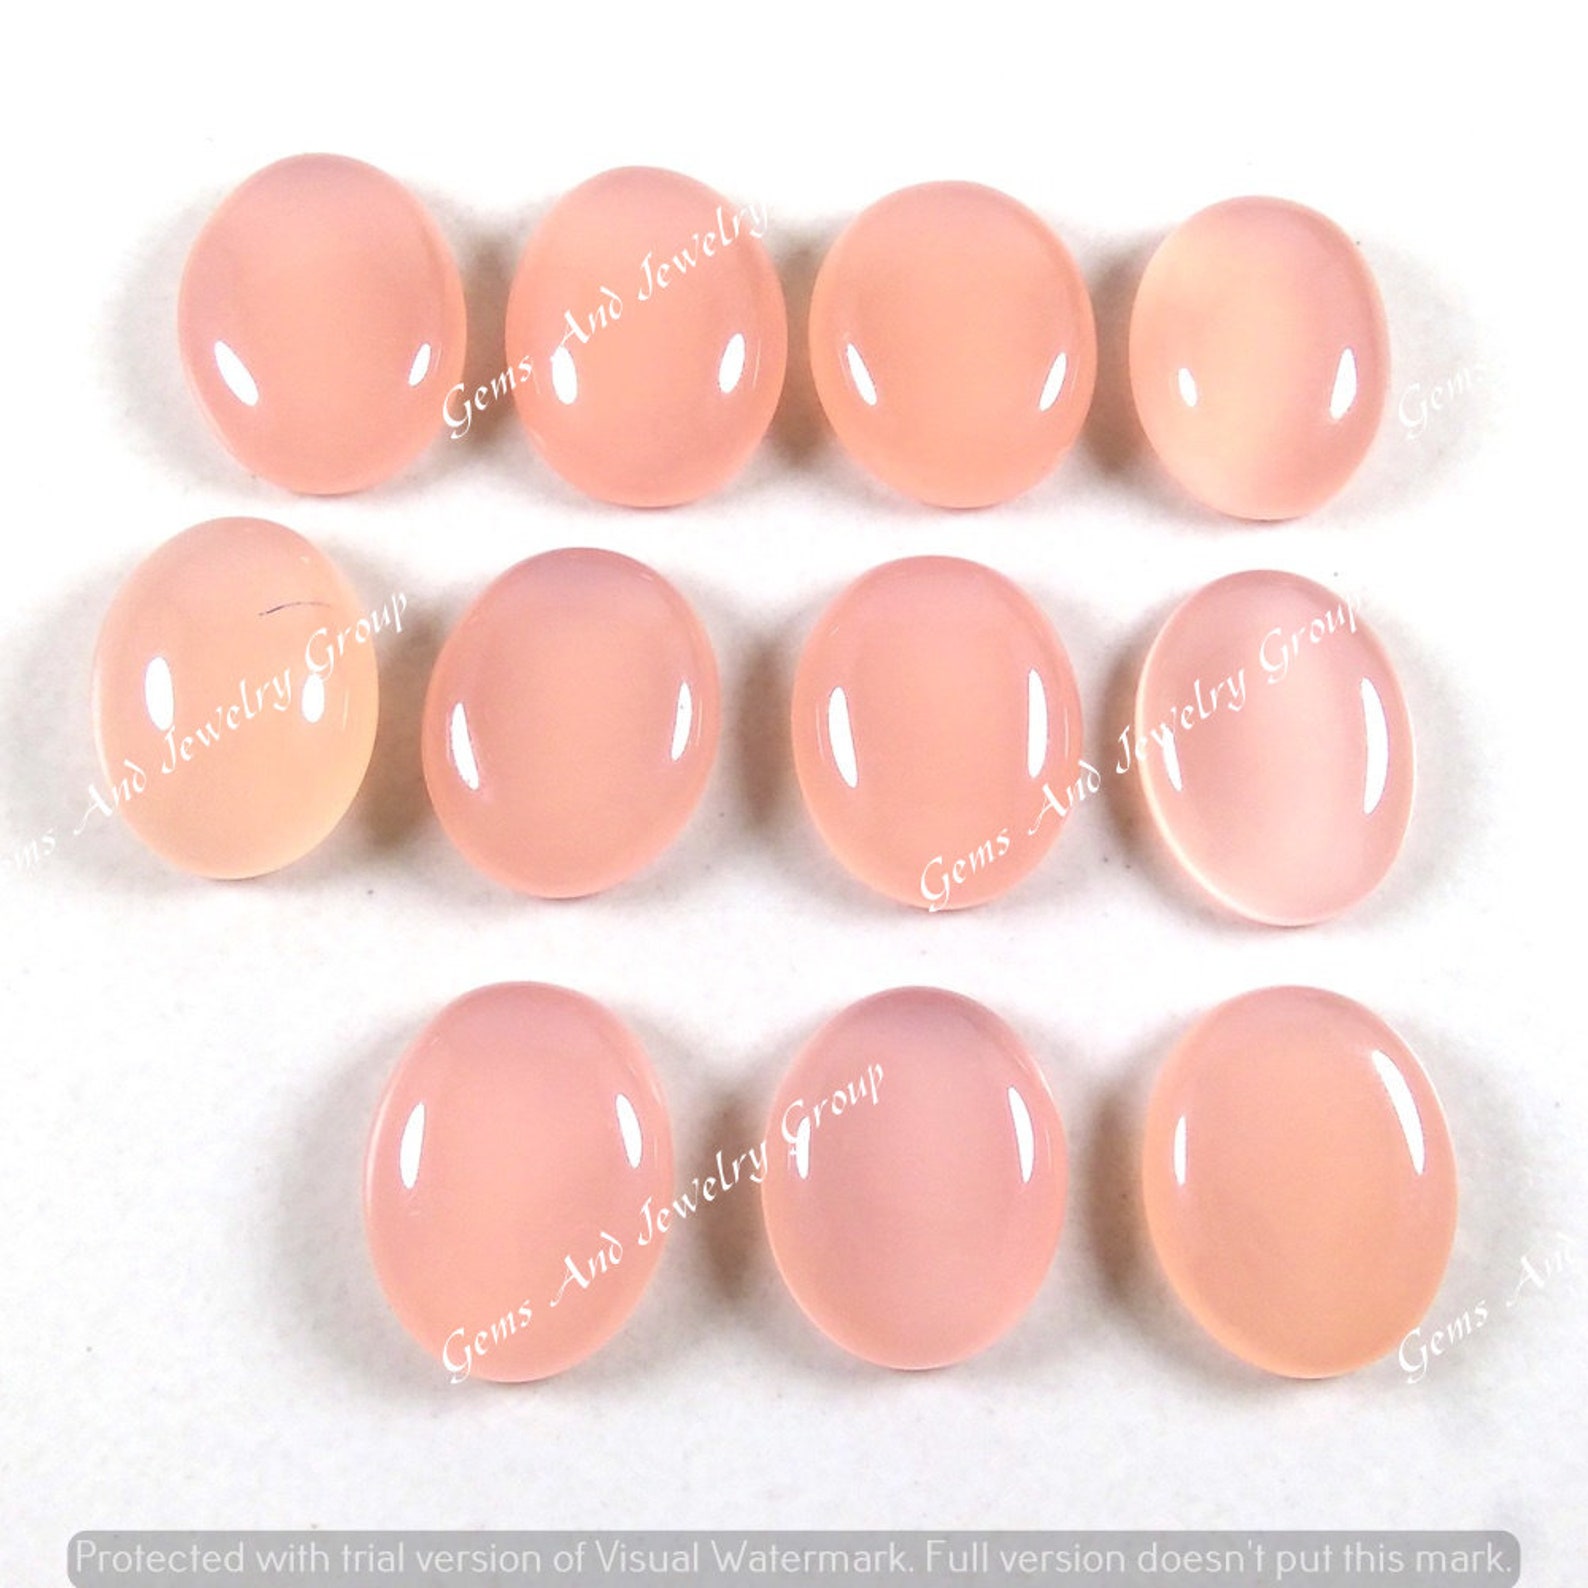 Quality Natural Pink Chalcedony Cabochon Oval Gemstone For | Etsy